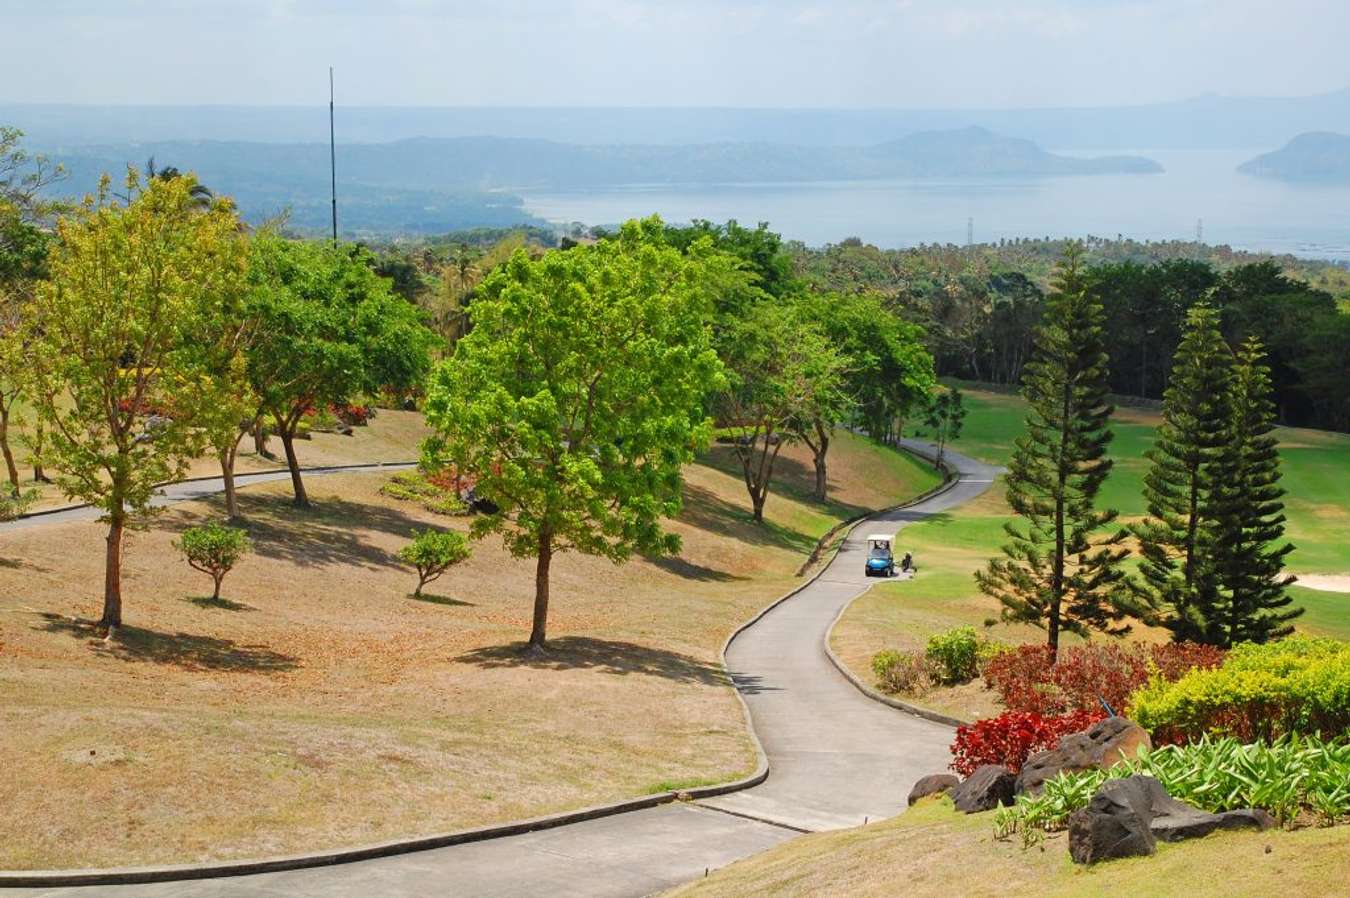 tour in tagaytay philippines